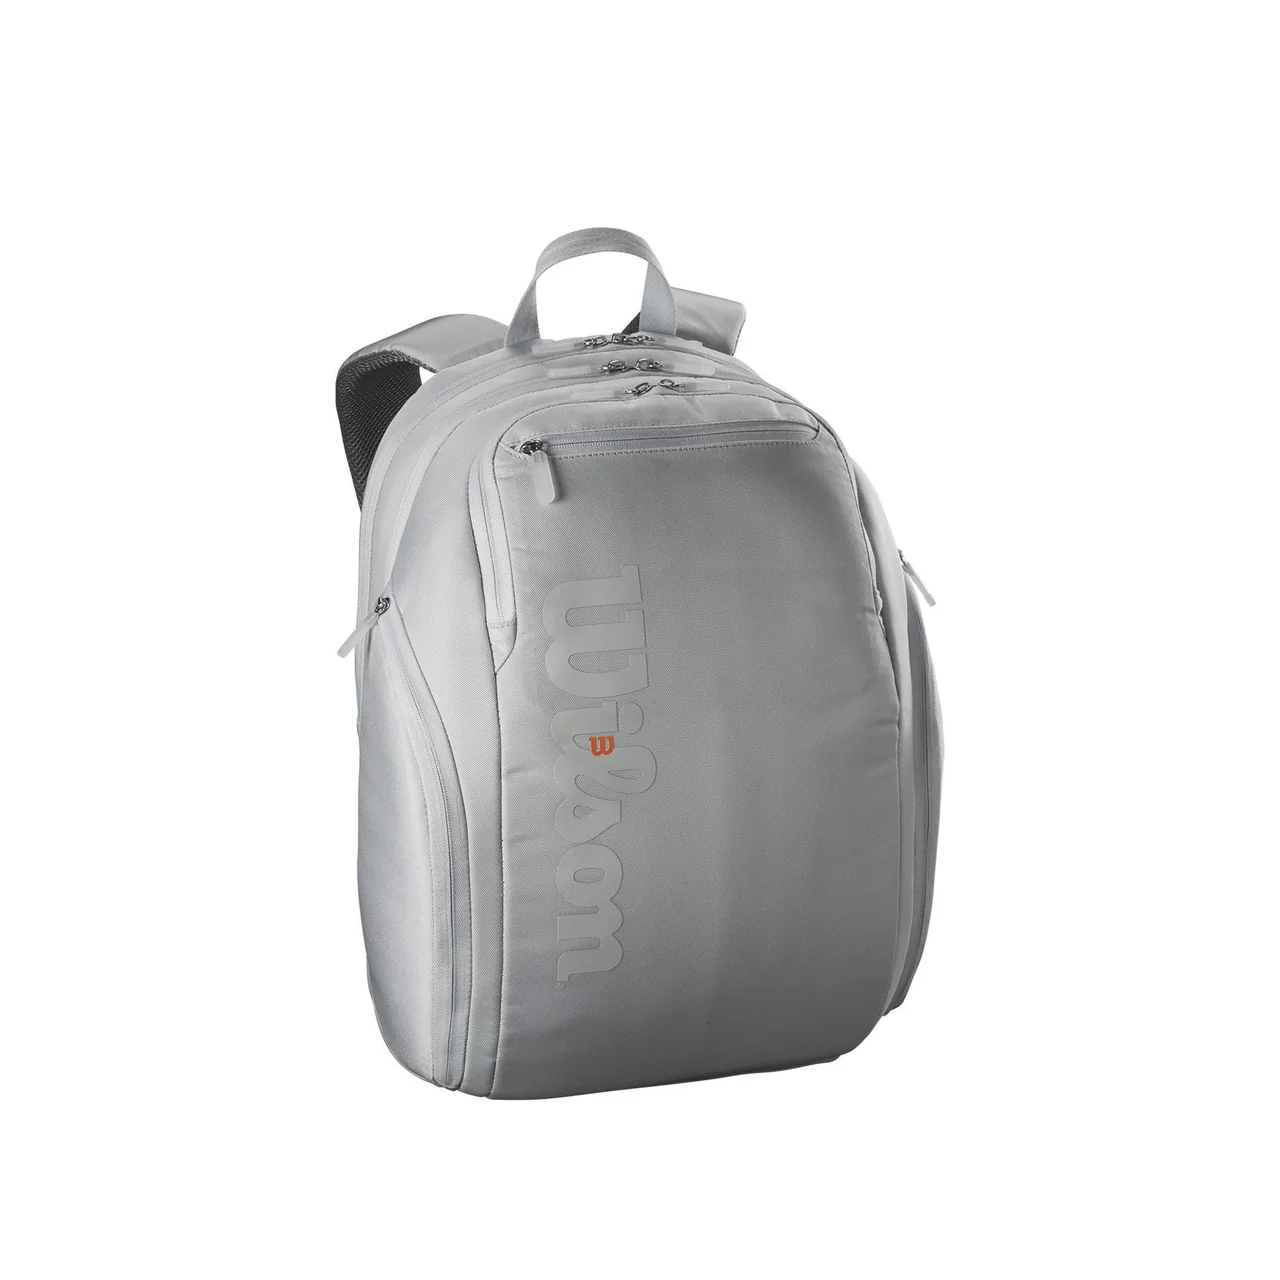 Wilson Shift Super Tour Backpack Artic Ice